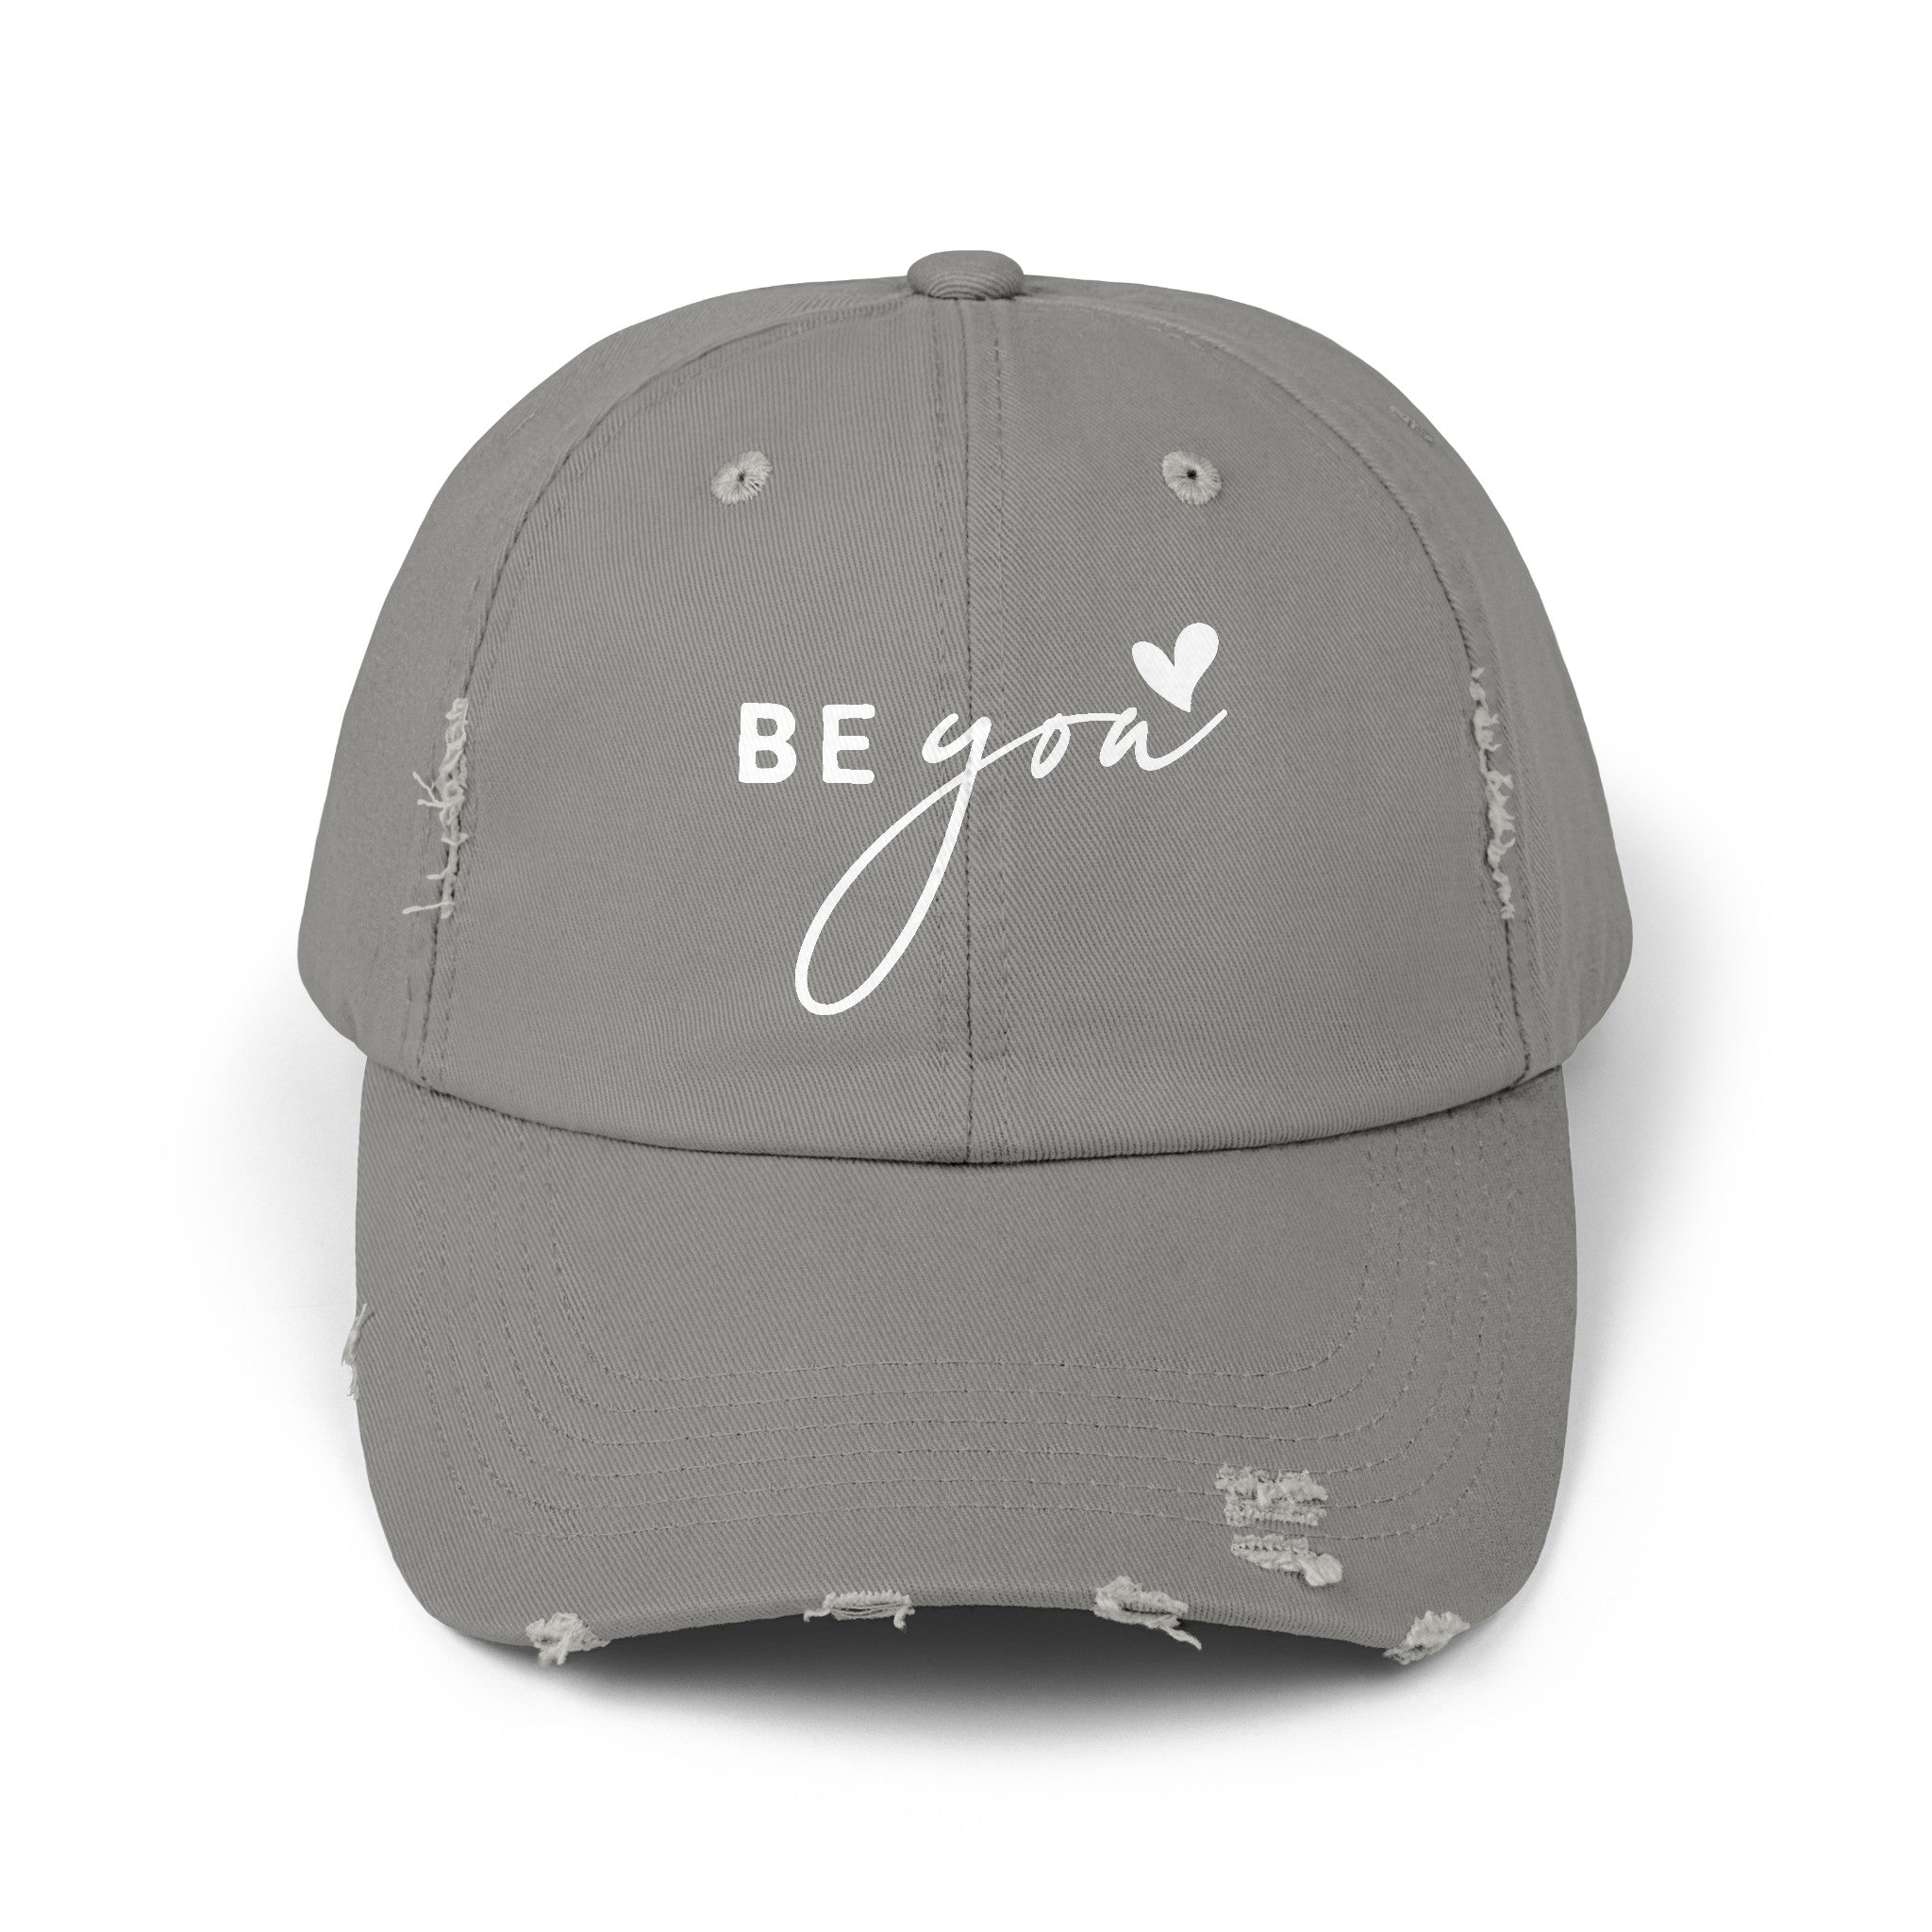 Distressed Cap Be YOU - Light Olive / One size - Hats